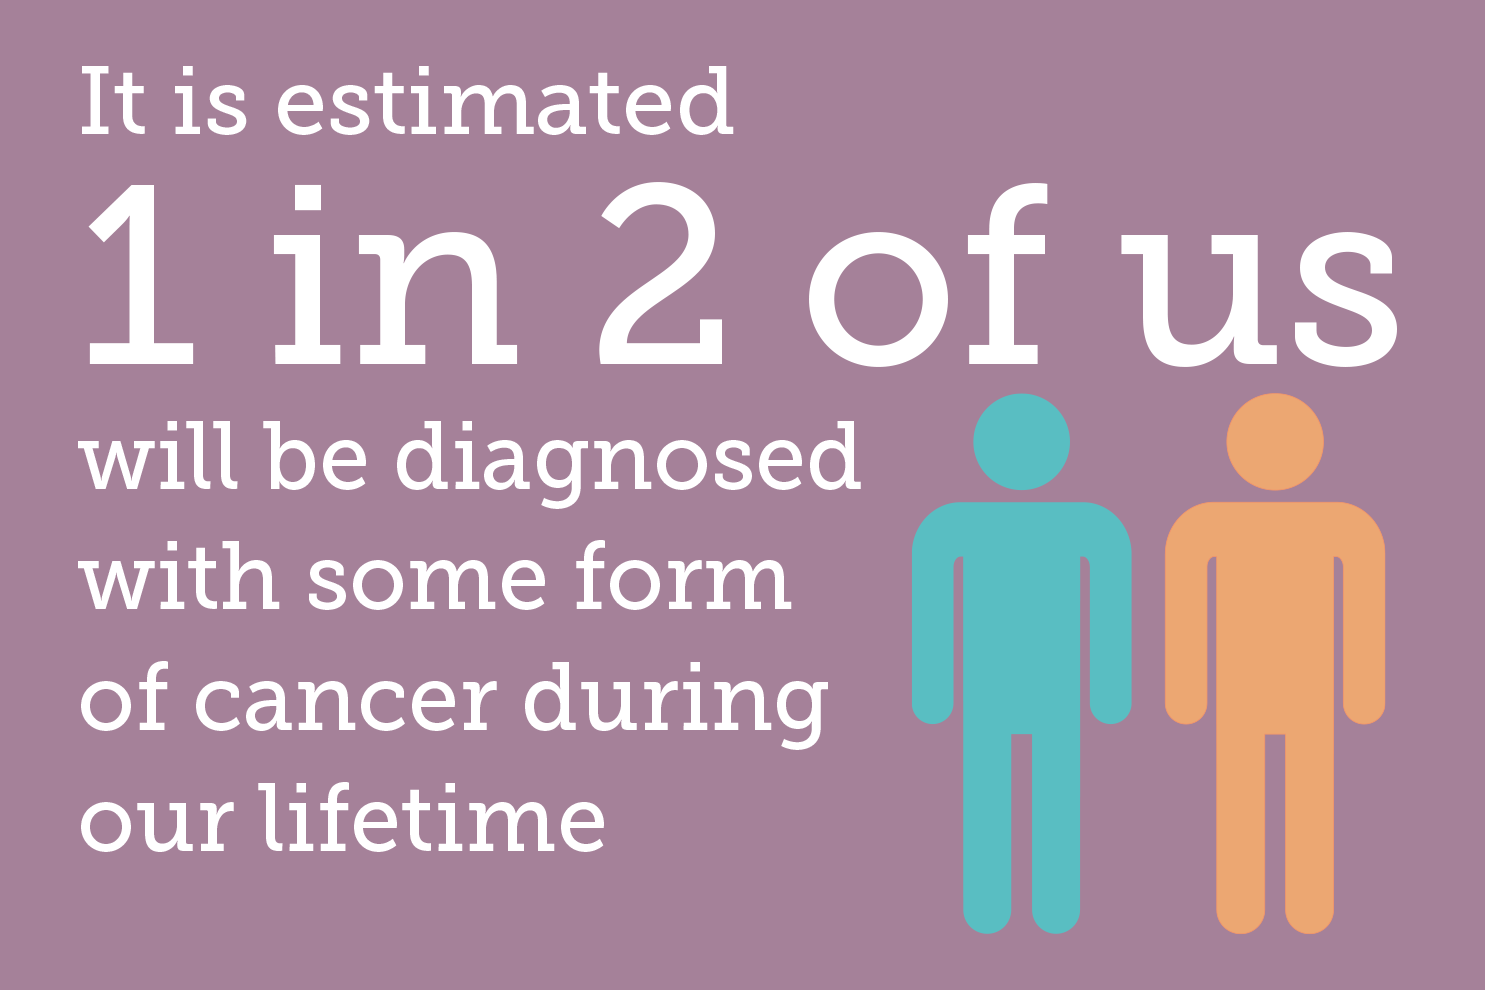 It is estimated 1 in 2 of us will be diagnosed with some form of cancer during our lifetime